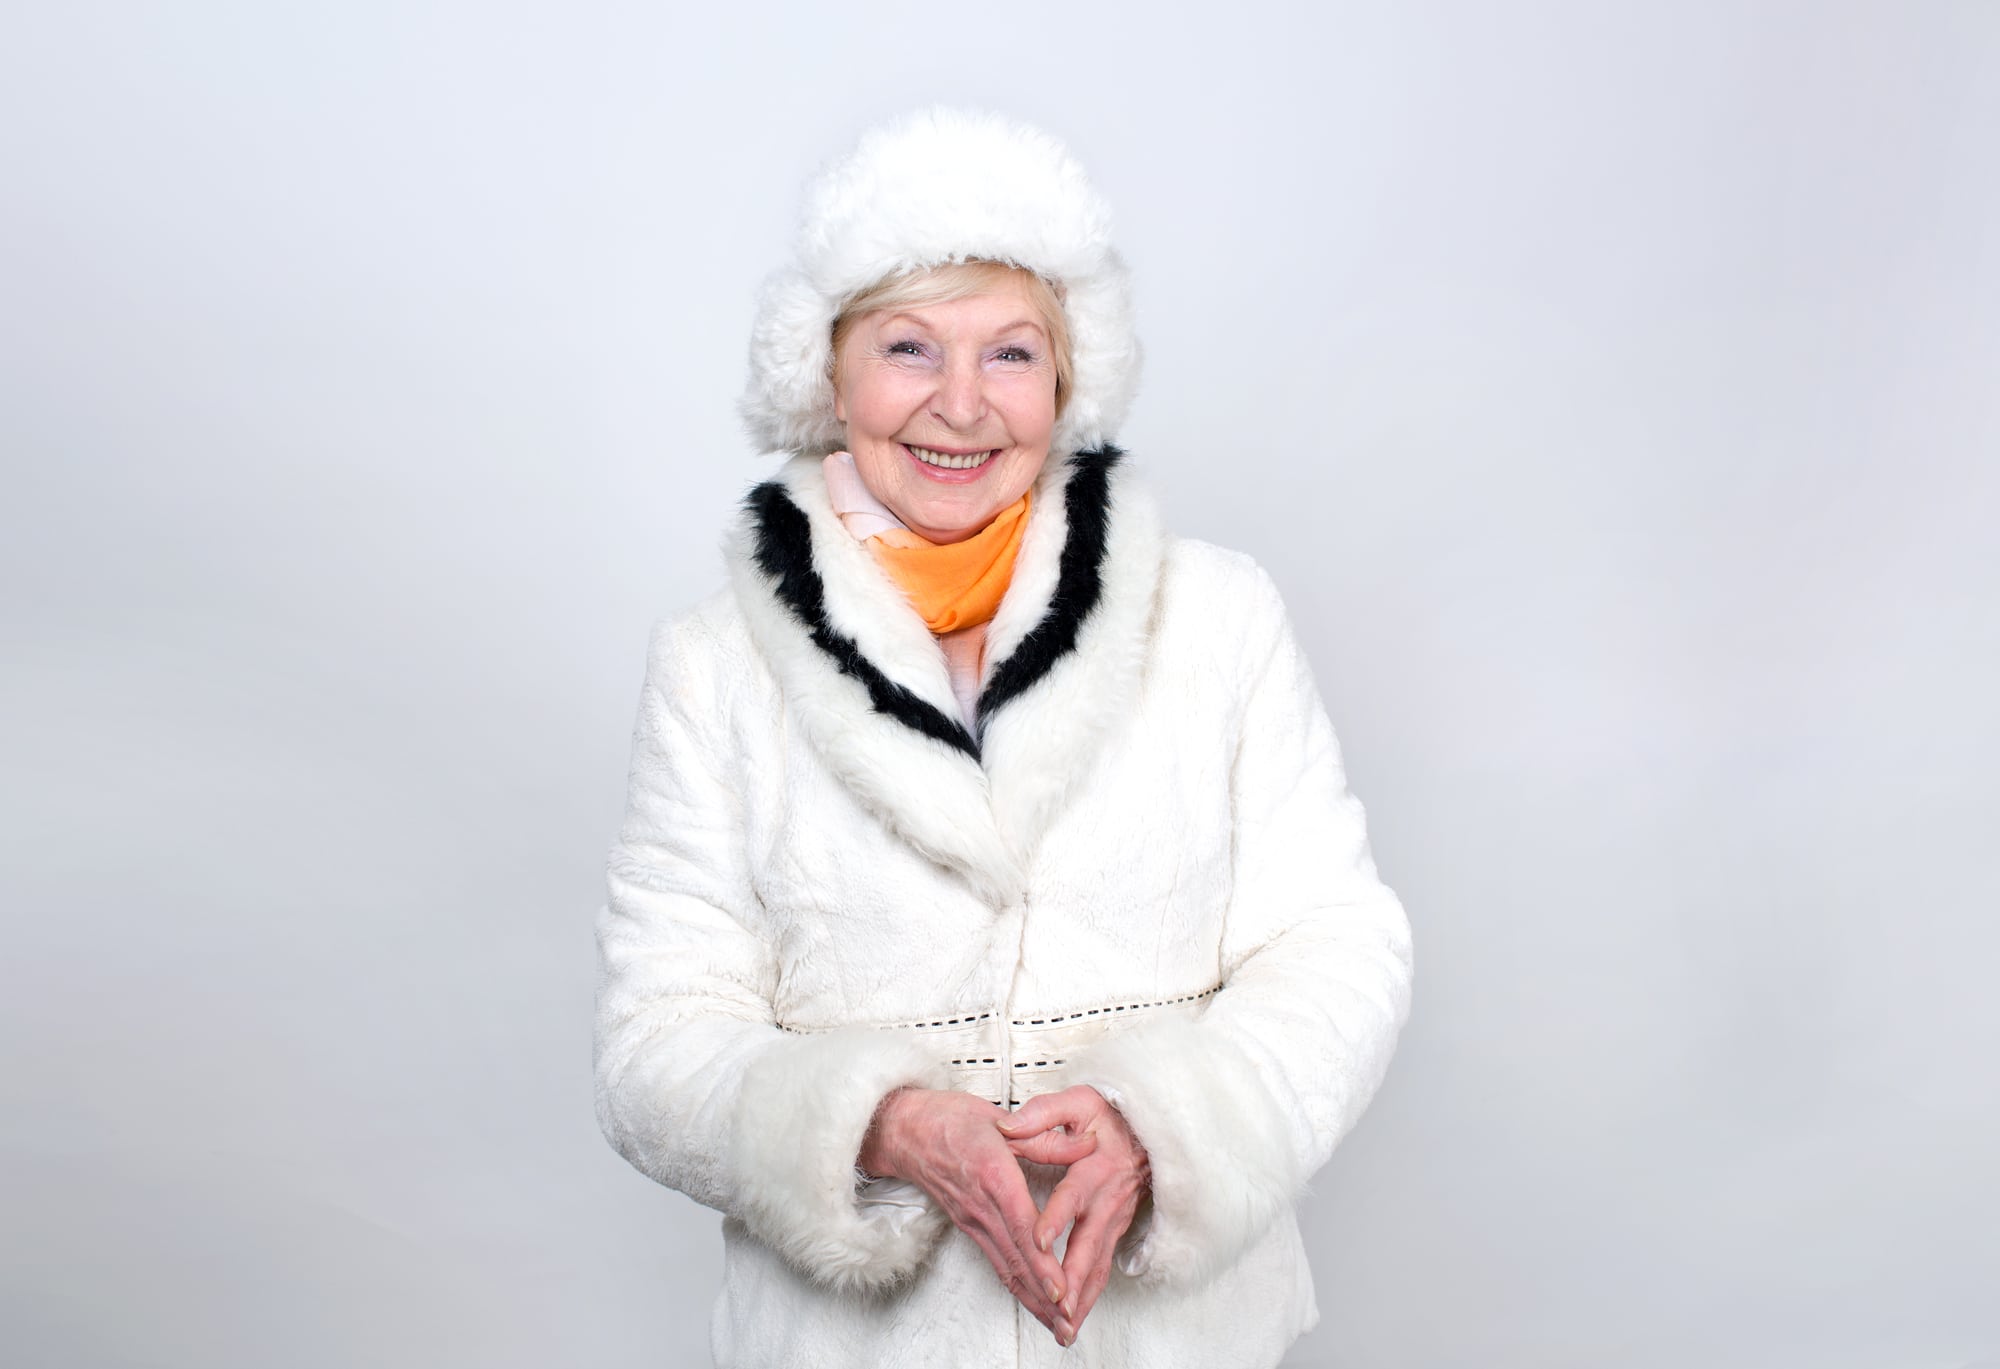 Smiling senior woman dressed in winter outerwear